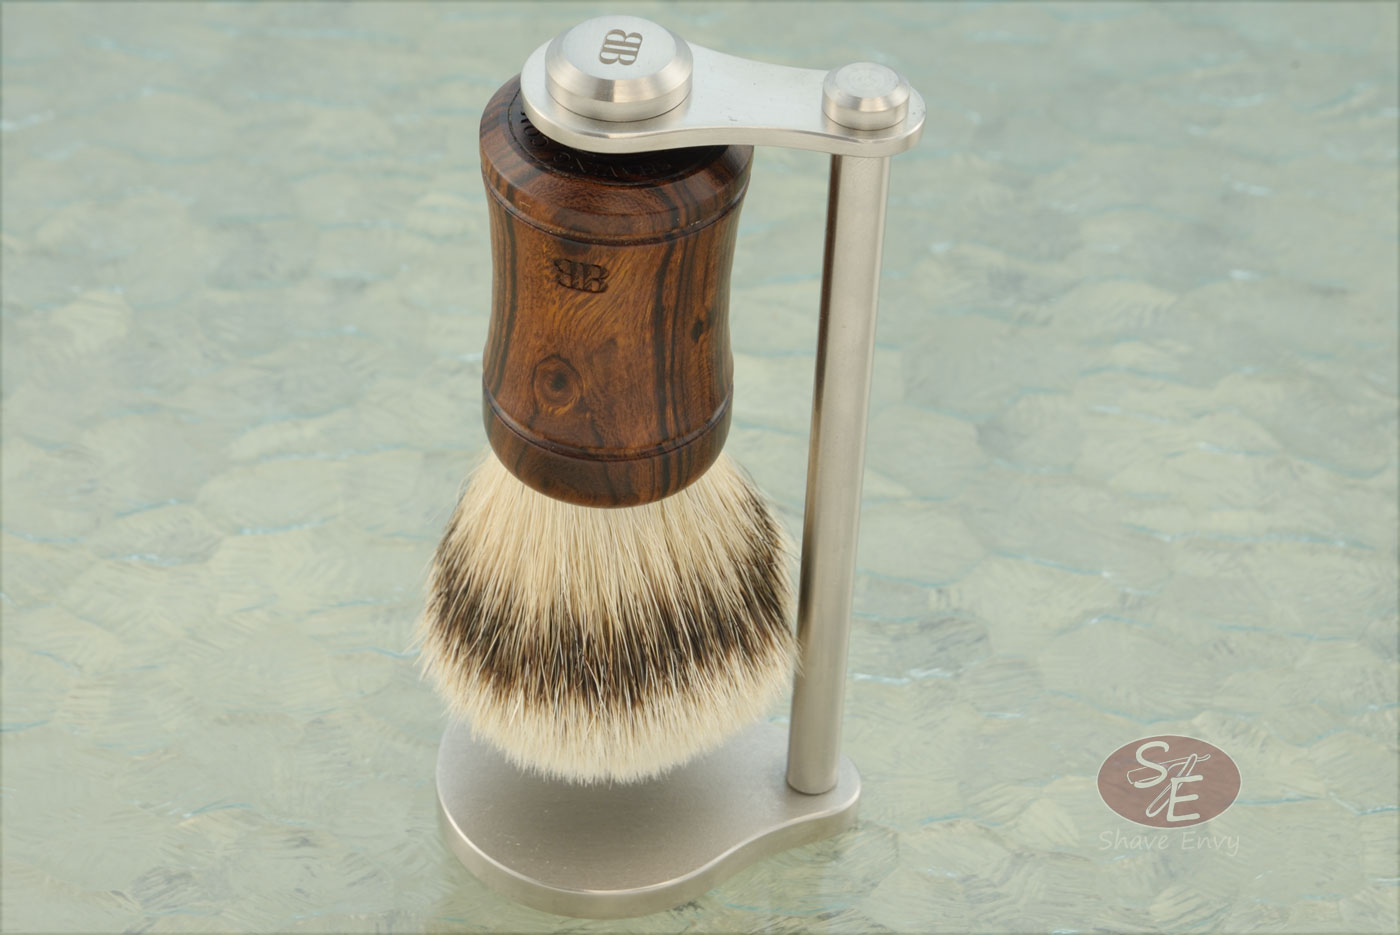 Silvertip Shaving Brush with Magnetic Stand - Ironwood (24mm Knot)